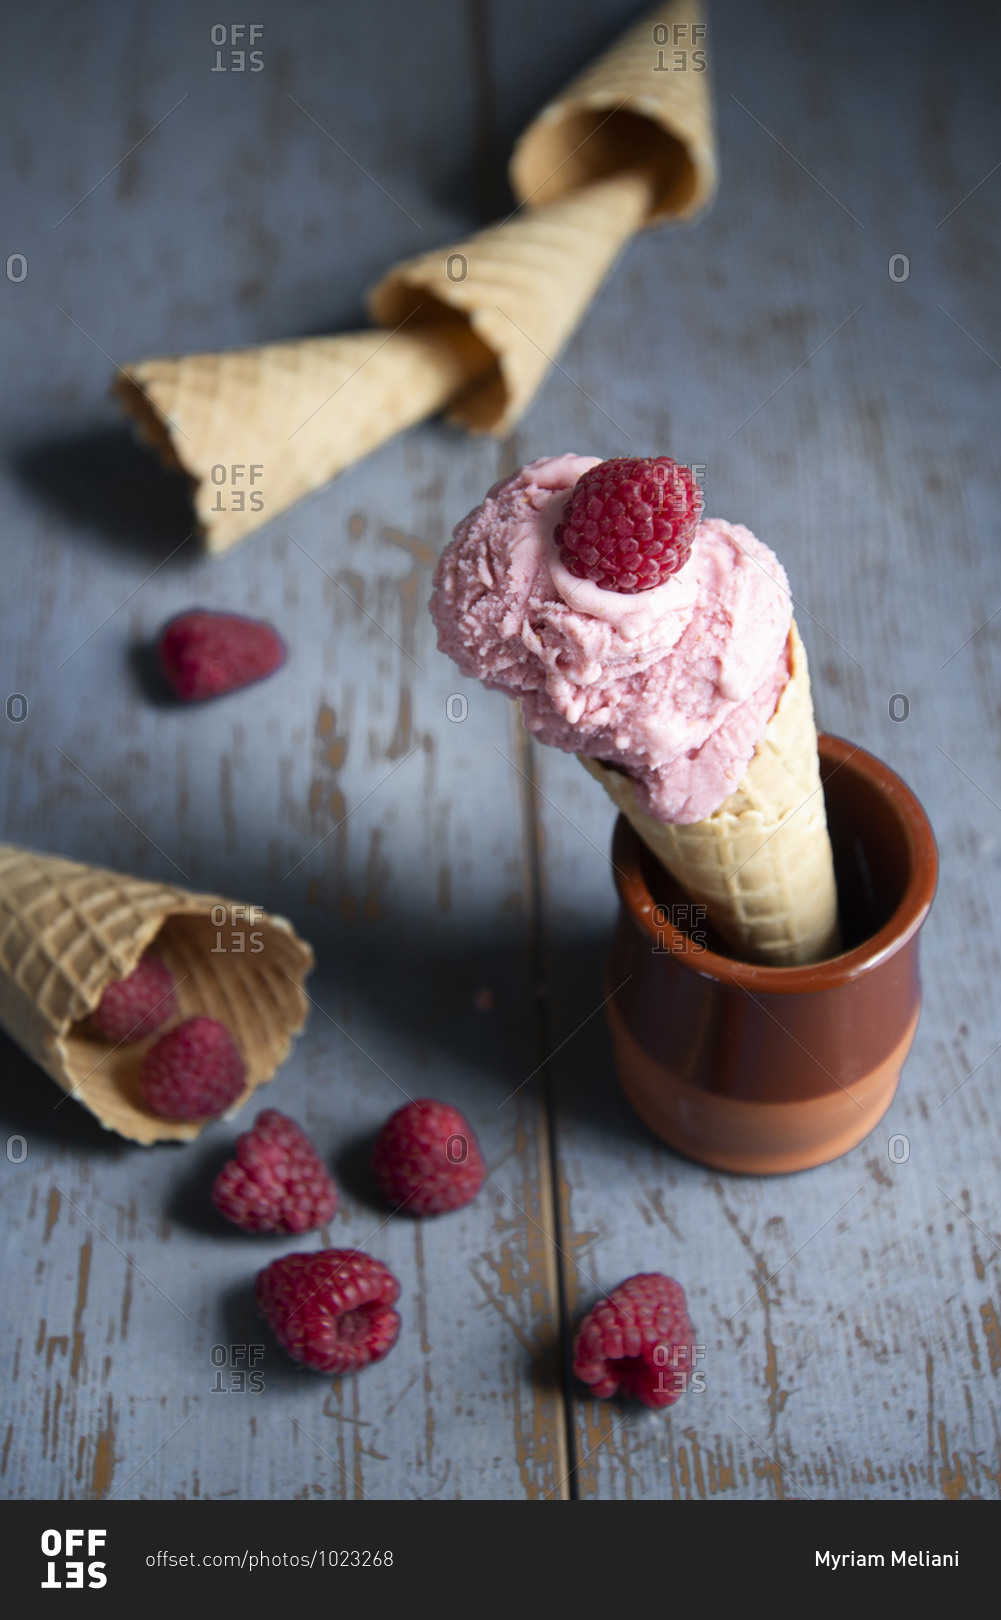 Raspberry ice cream in a waffle cone with fresh raspberries on a rustic wooden surface